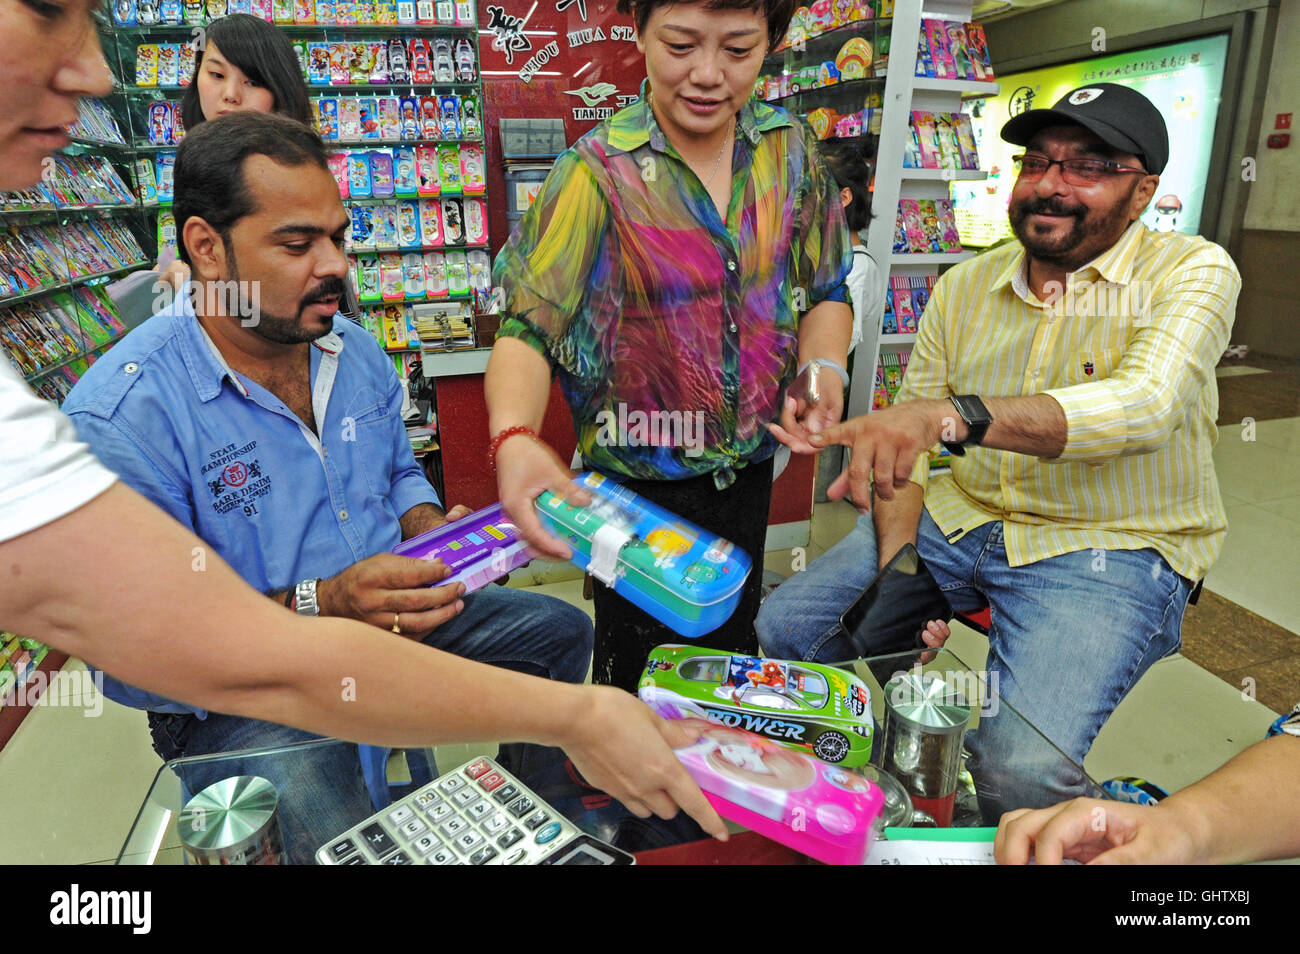 (160811) -- YIWU, Aug. 11, 2016 (Xinhua) -- Indian trader Jatinder Sayal (1st R) talks business with Chinese dealers in Yiwu, a famous production base for small commodities in east China's Zhejiang Province, Aug. 3, 2016. Jatinder Sayal came to Yiwu to do business of commodity export in 2008 and opened a company in 2010. His company's sales revenue reached 16 million yuan (2.4 million US dollars) in 2015. There are more than 13,000 resident foreign traders from over 100 countries and regions in Yiwu, according to statistics. (Xinhua/Tan Jin) (wyo) Stock Photo